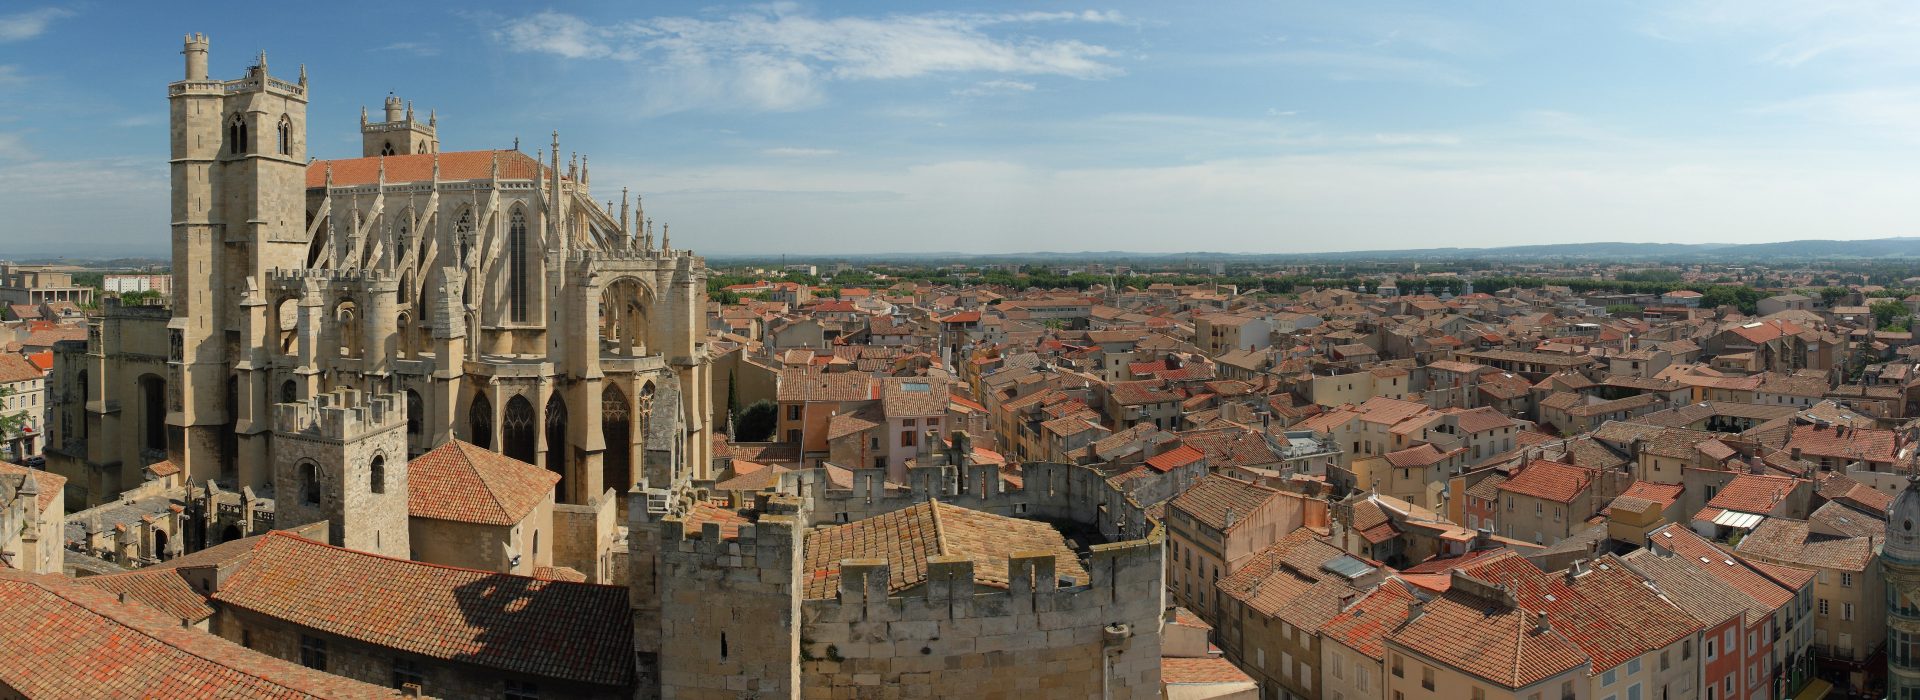 Narbonne Panorama 